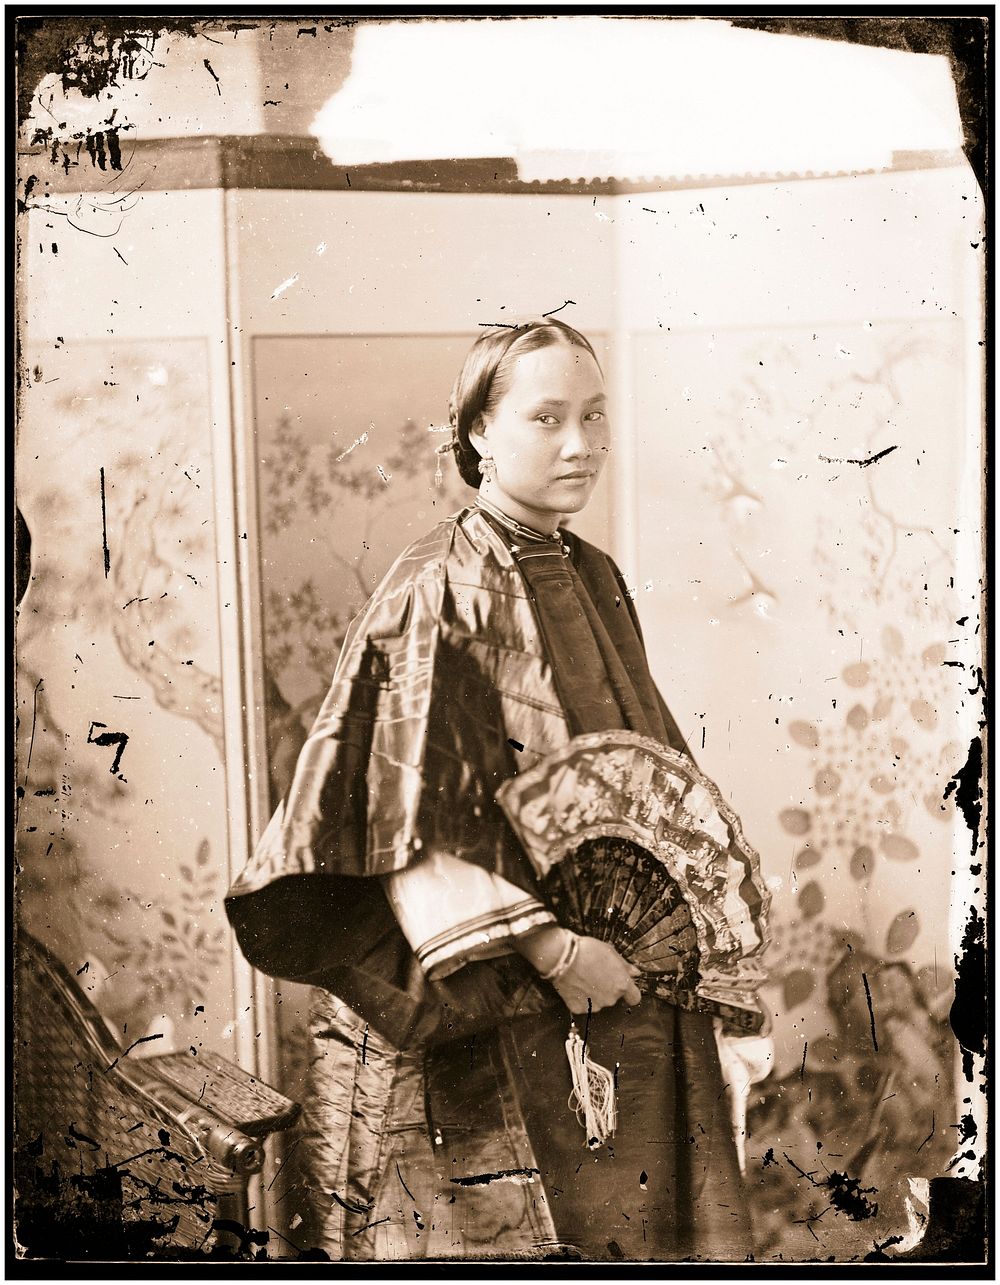 Canton, Kwangtung (Guangdong) province, China: a young woman. Photograph by John Thomson, 1869.